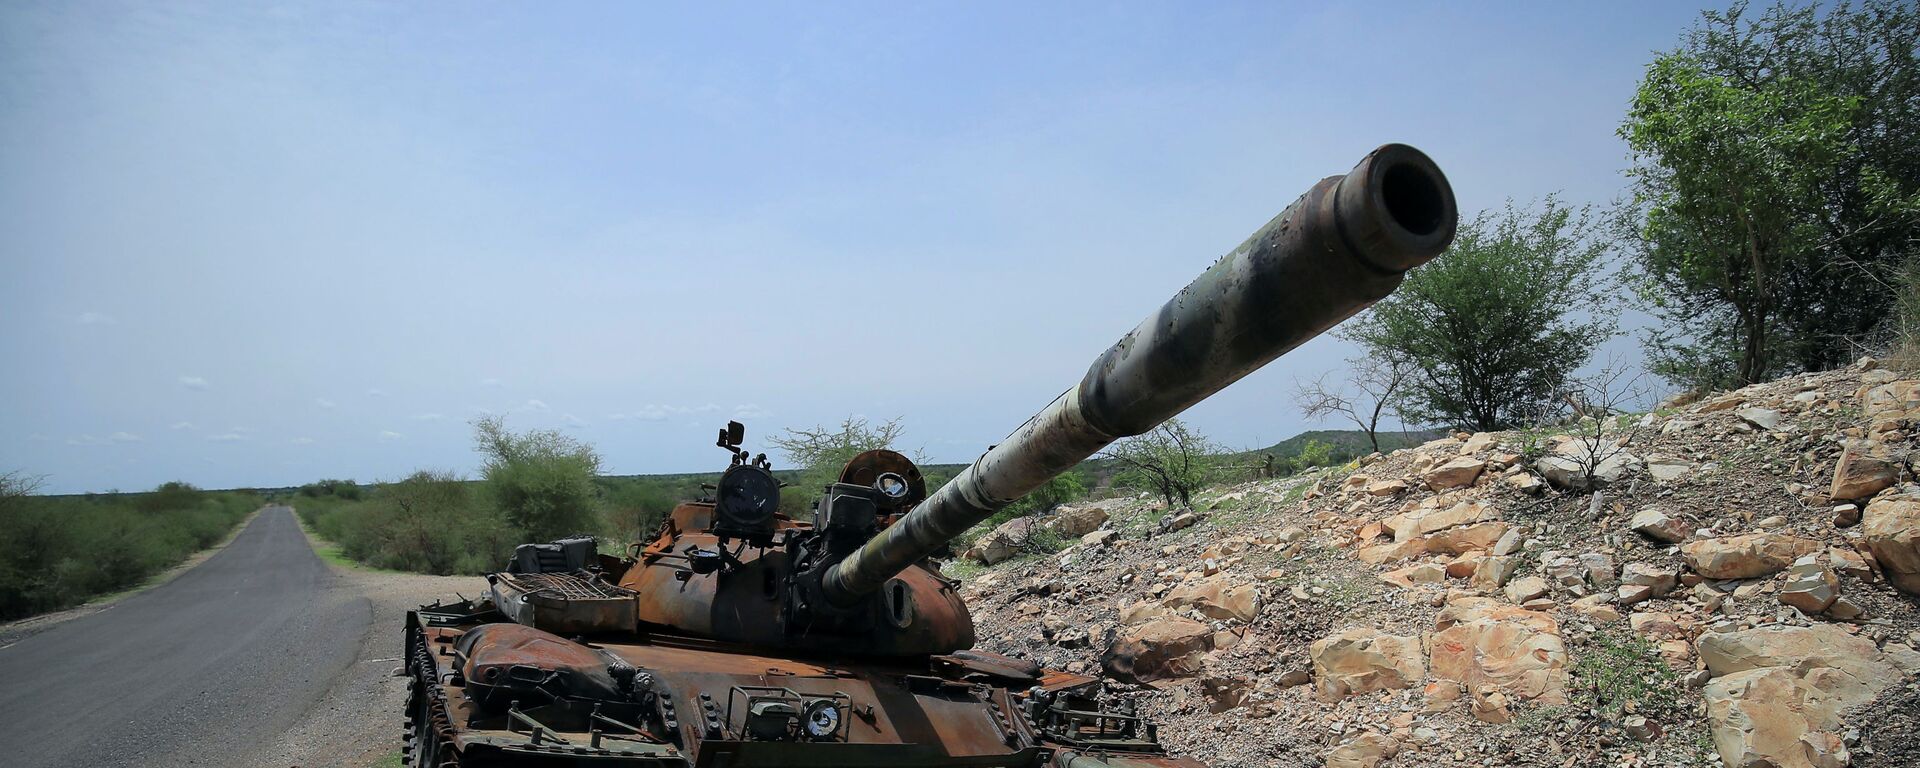 A tank damaged during the fighting between Ethiopia?s National Defense Force (ENDF) and Tigray Special Force stands on the outskirts of Humera town in Ethiopia July 1, 2021 Picture taken July 1, 2021 - Sputnik International, 1920, 25.11.2021